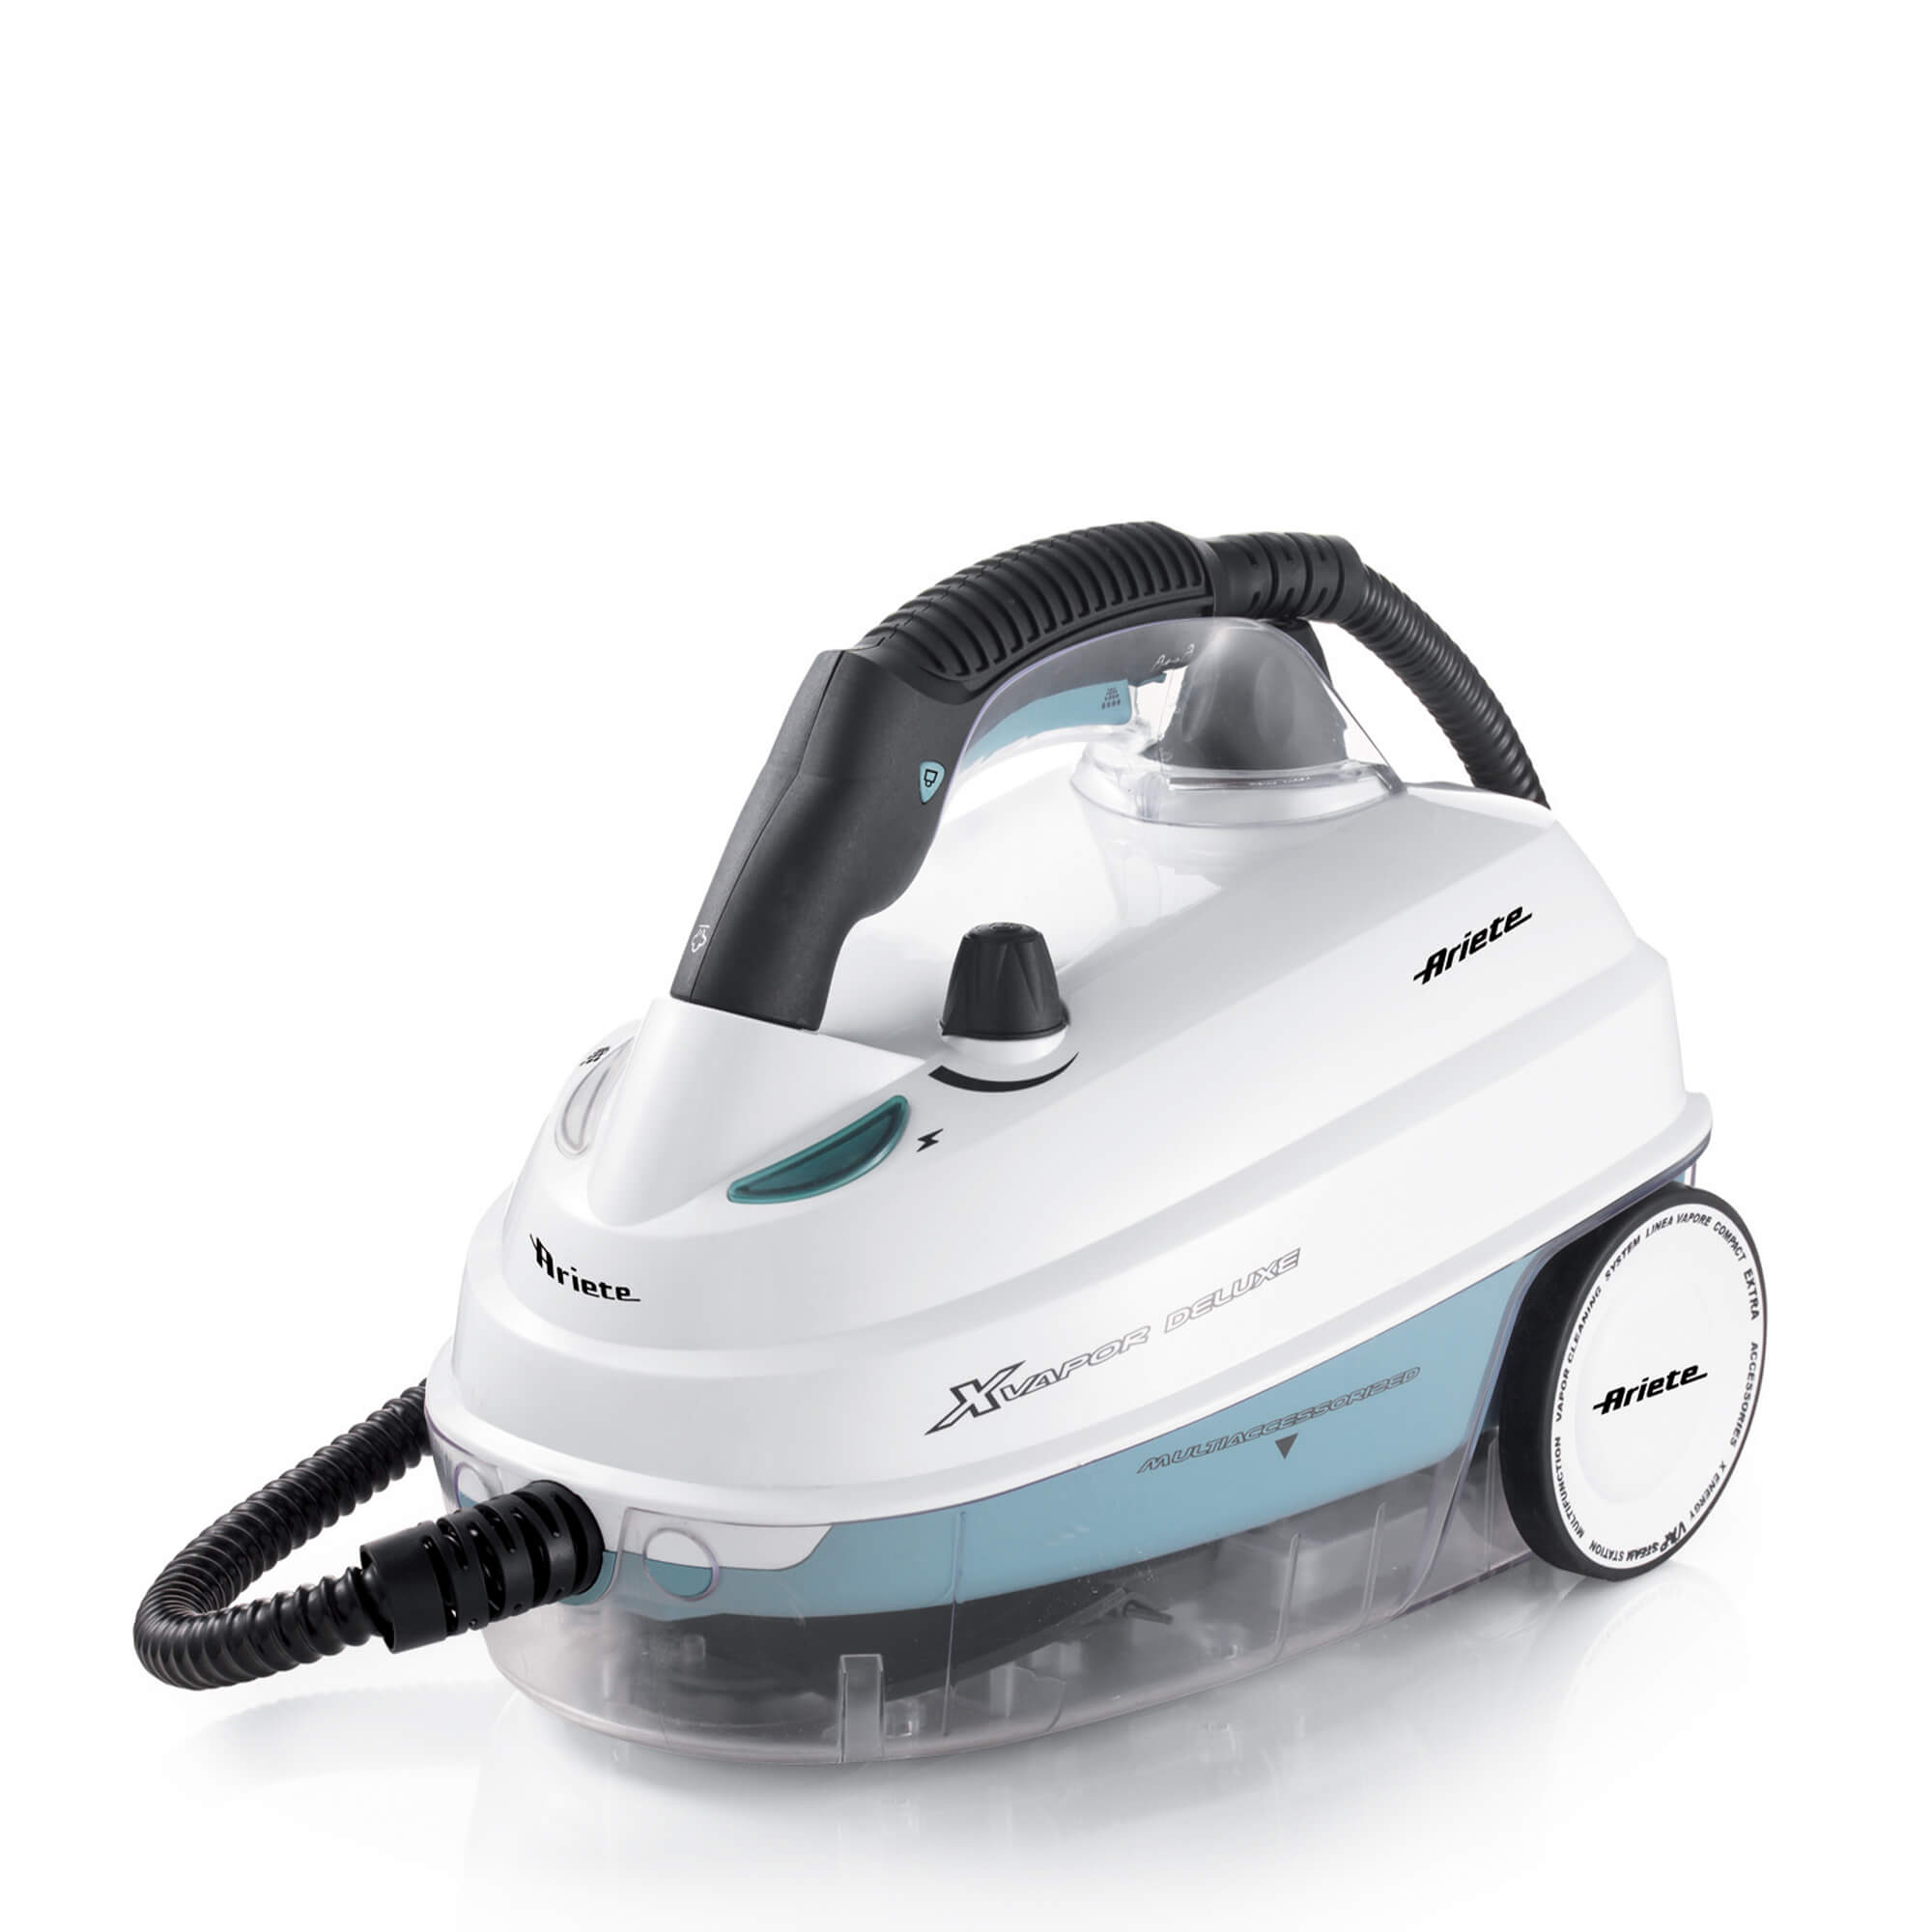 Steam cleaner to sanitize / clean the house, XVapor Deluxe